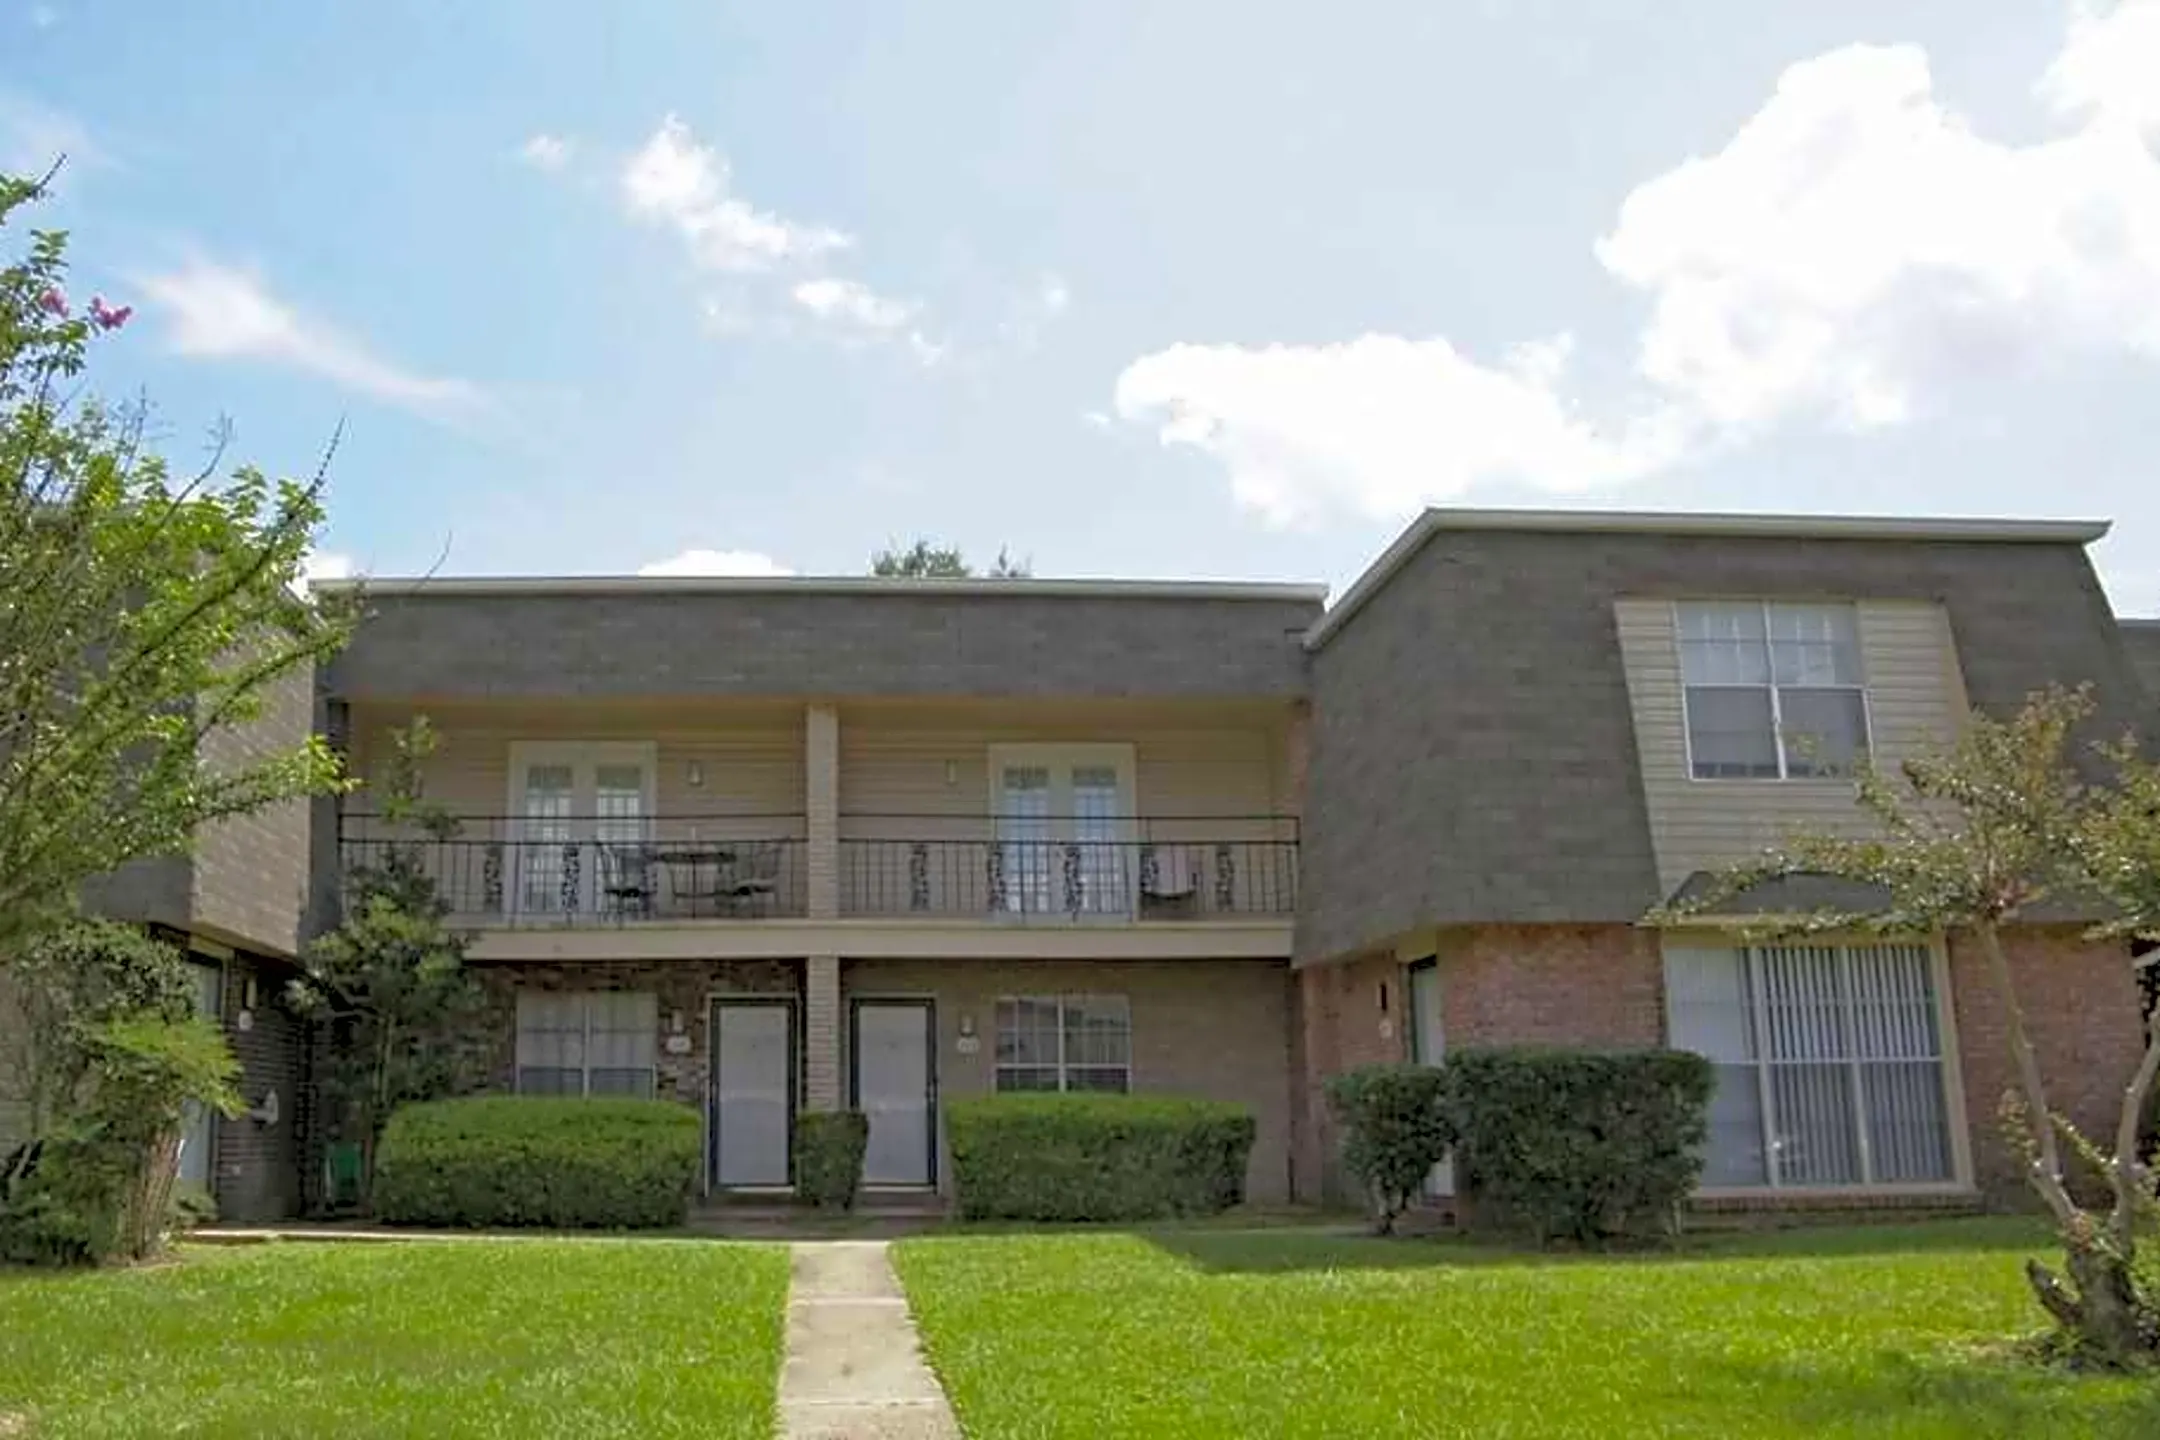 Building - Southern Pines Apartments - Gulfport, MS